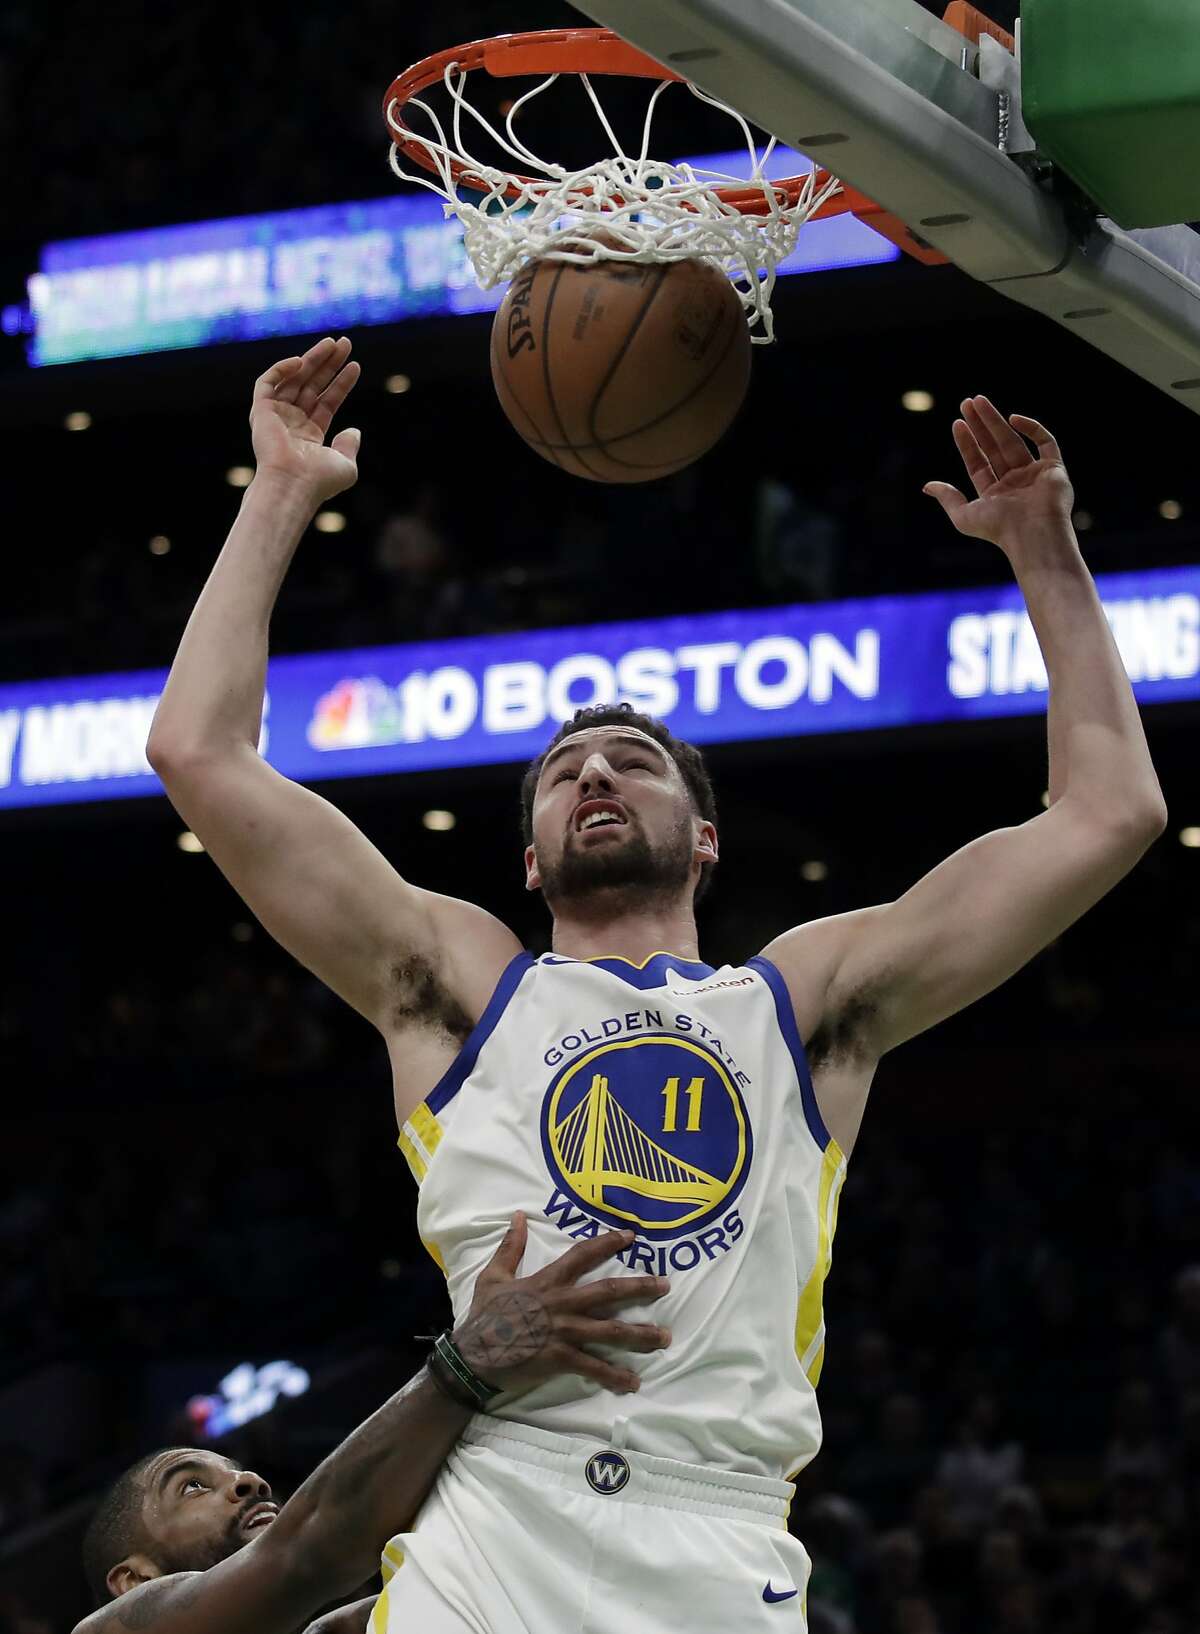 Golden State Warriors guard Klay Thompson (11) dunks against Boston Celtics guard Kyrie Irving, below, in the second half of an NBA basketball game, Saturday, Jan. 26, 2019, in Boston. (AP Photo/Elise Amendola)